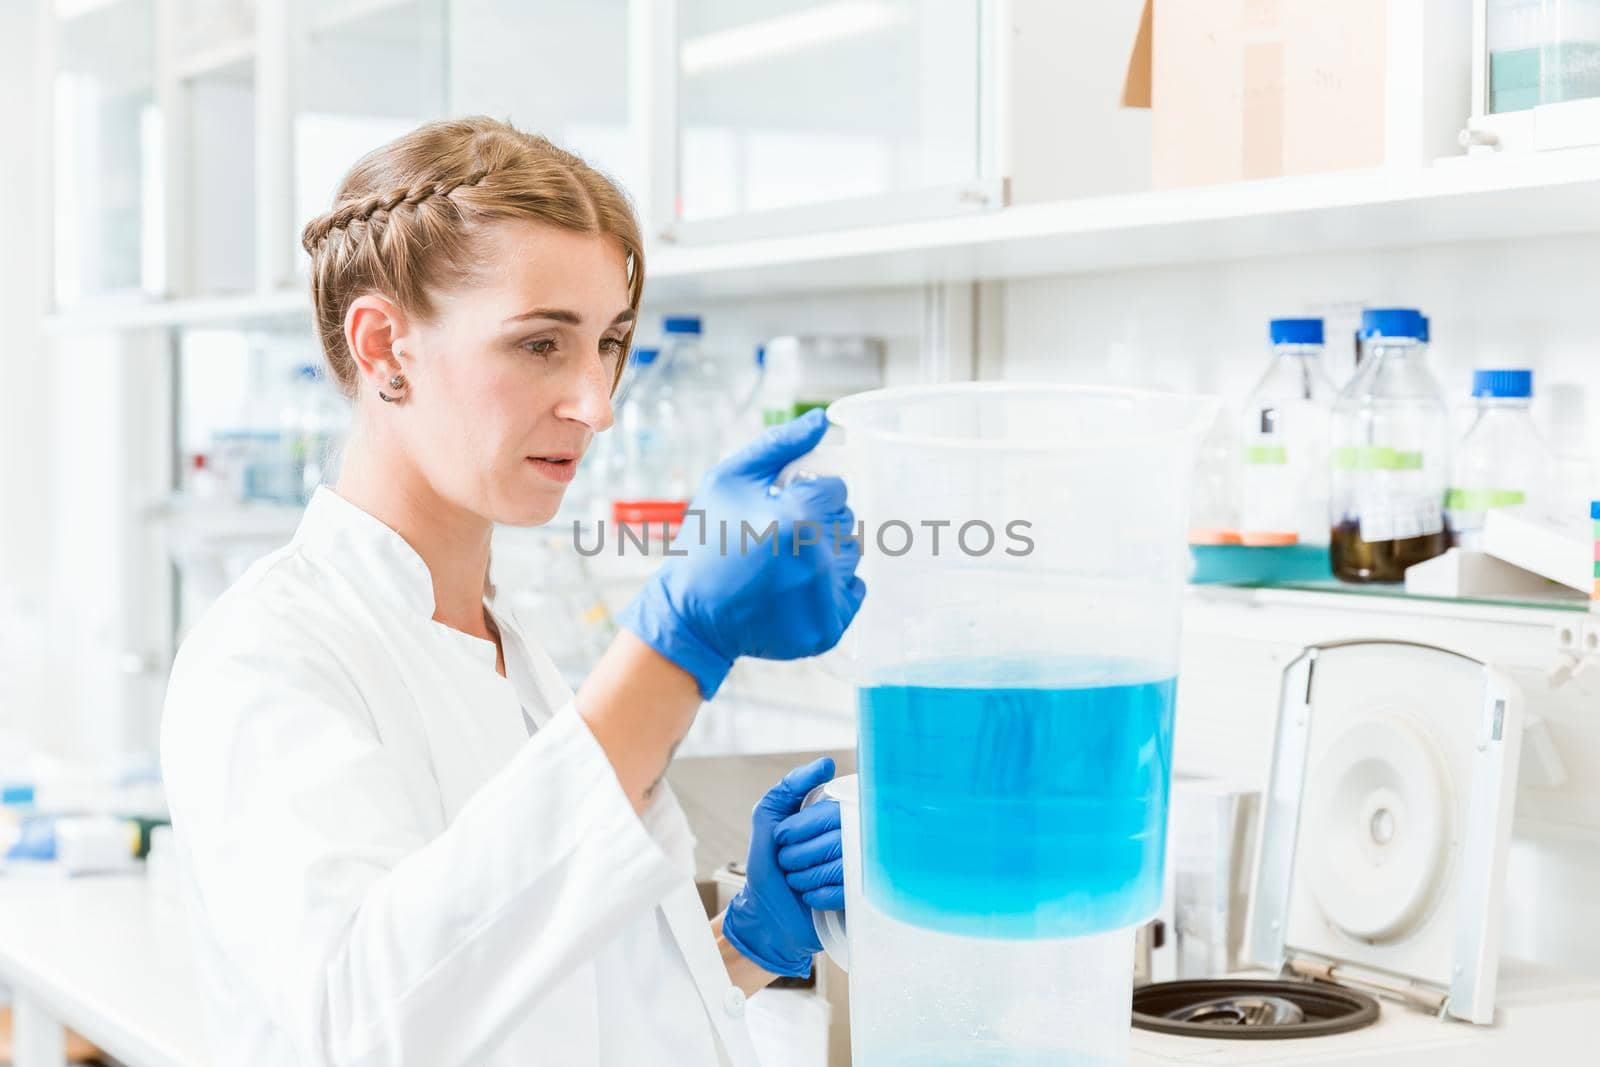 Young focused female doctor looking at blue liquid in beaker while performing experiment in laboratory